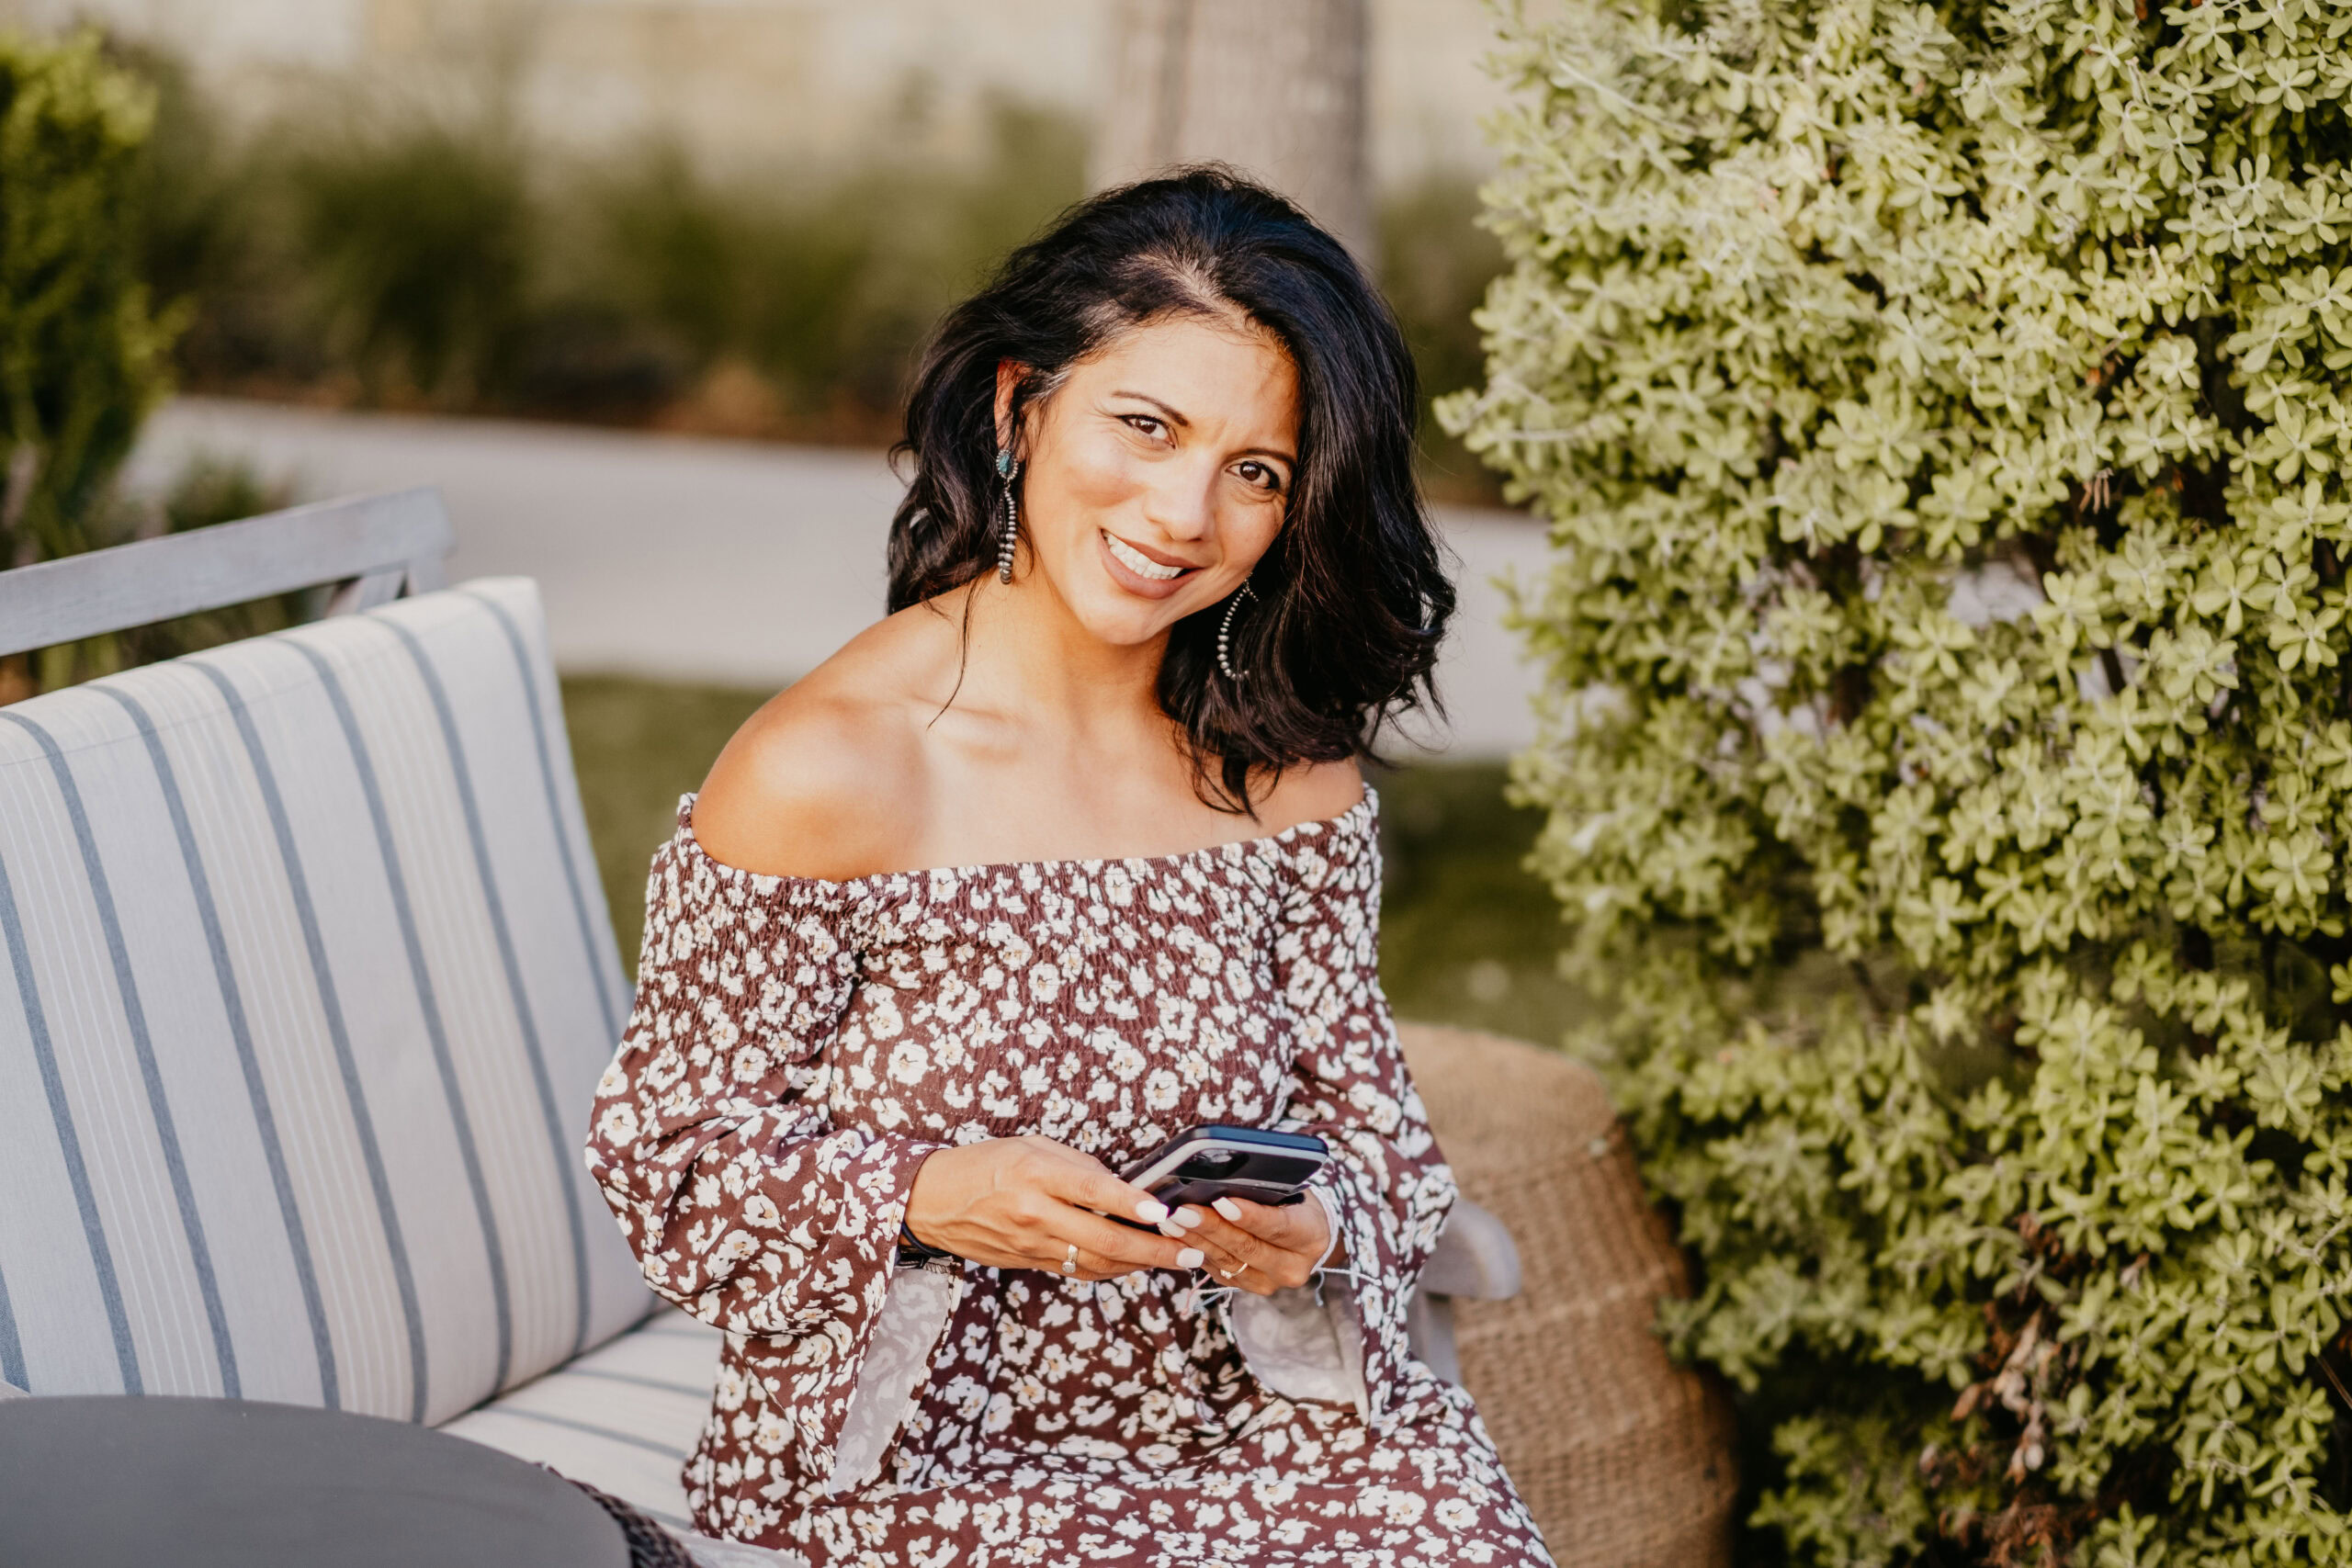 Susie Maldonado sits on an outdoor bench, wearing a floral off-the-shoulder dress, holding a phone, and smiling at the camera. She is surrounded by greenery, embodying the essence of thriving in midlife.